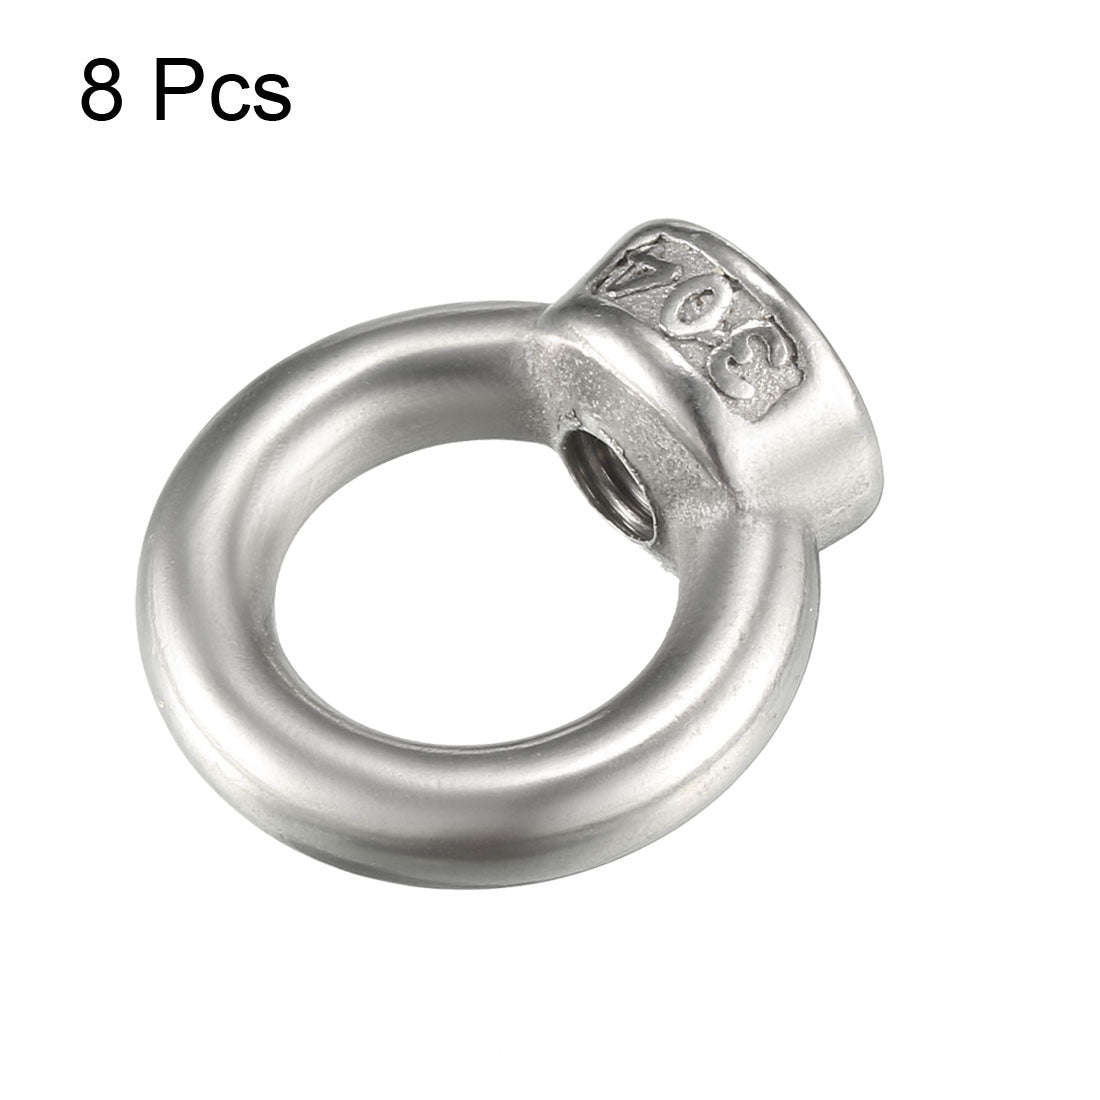 uxcell Uxcell M6 Female Thread 304 Stainless Steel Lifting Eye Nuts Ring 8pcs